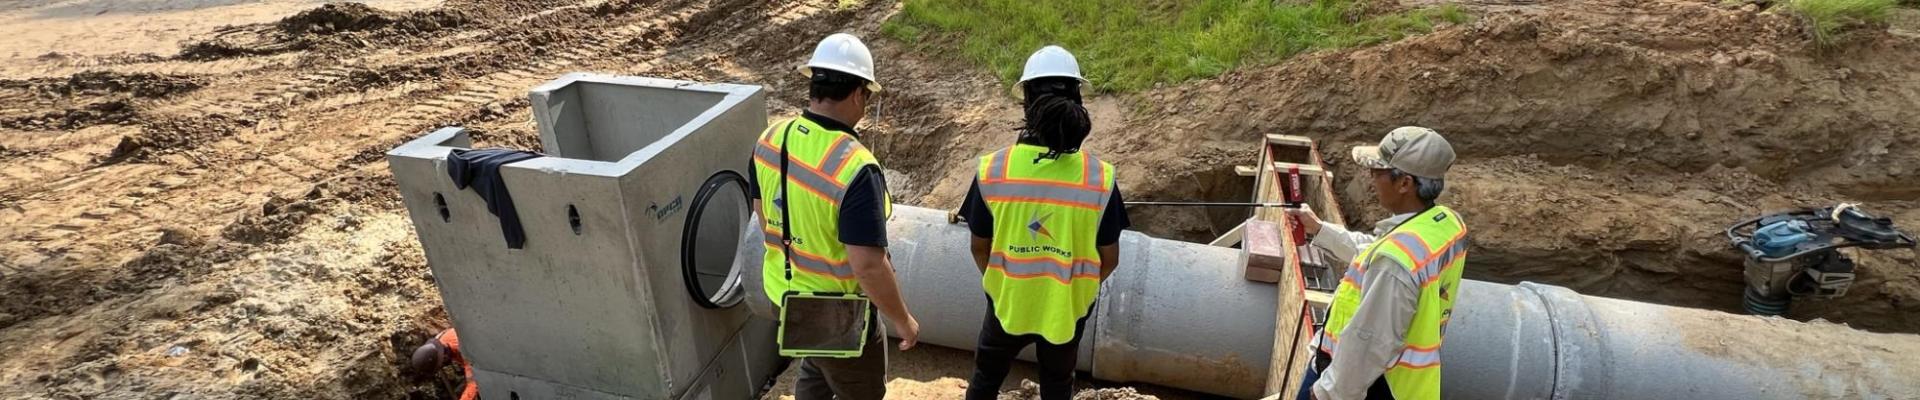 Knightdale Inspectors looking at Stormwater Device Installation 